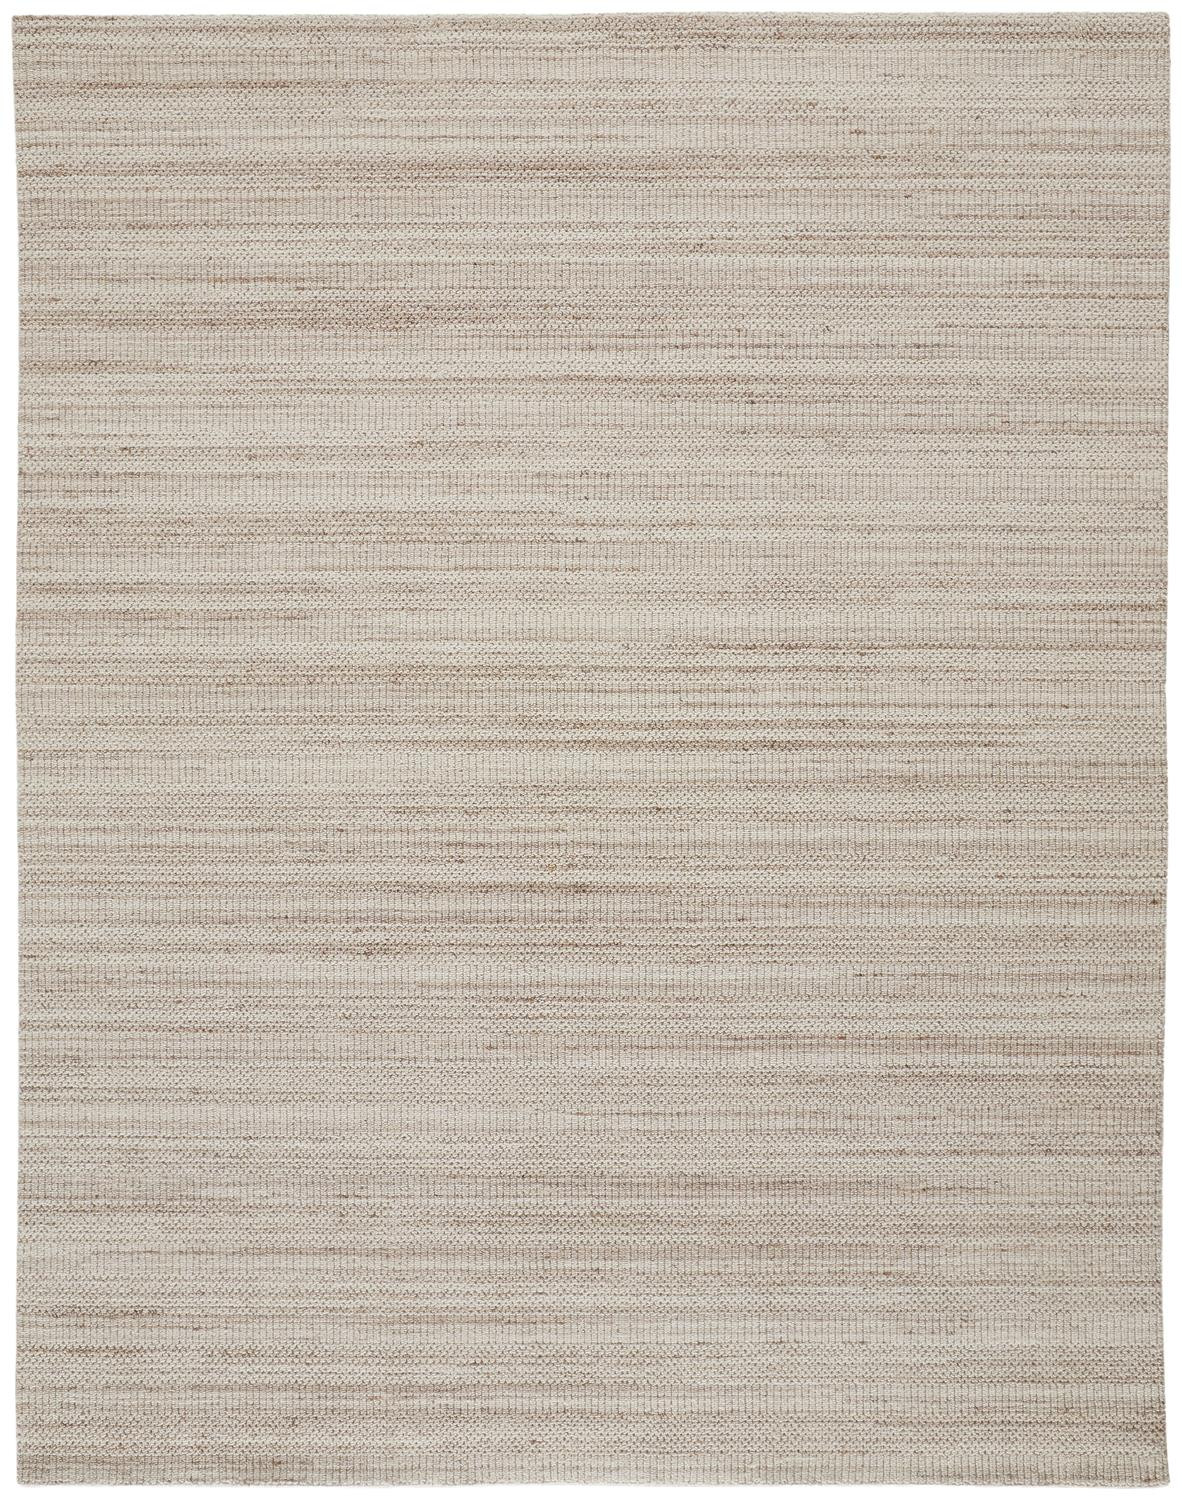 2' X 3' Ivory Wool Hand Woven Stain Resistant Area Rug-514043-1